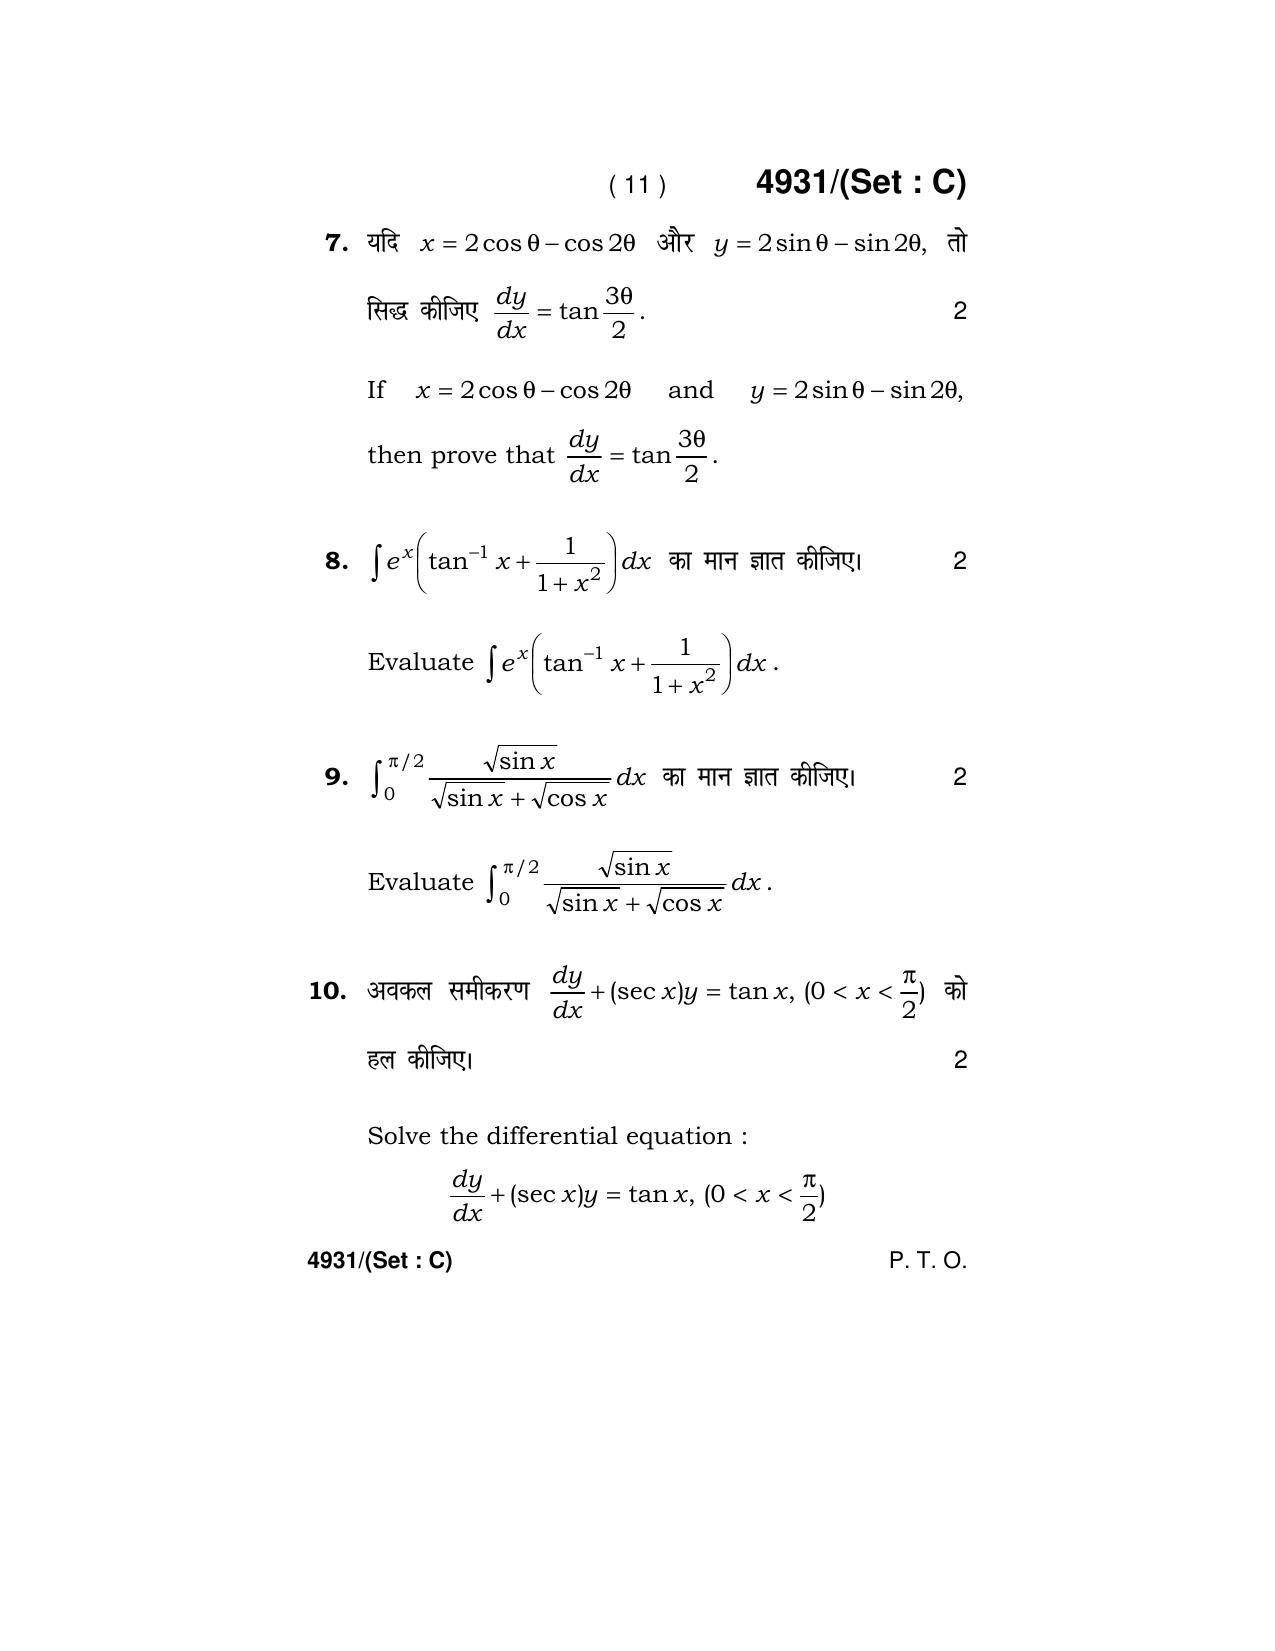 Haryana Board HBSE Class 12 Mathematics 2020 Question Paper - Page 43